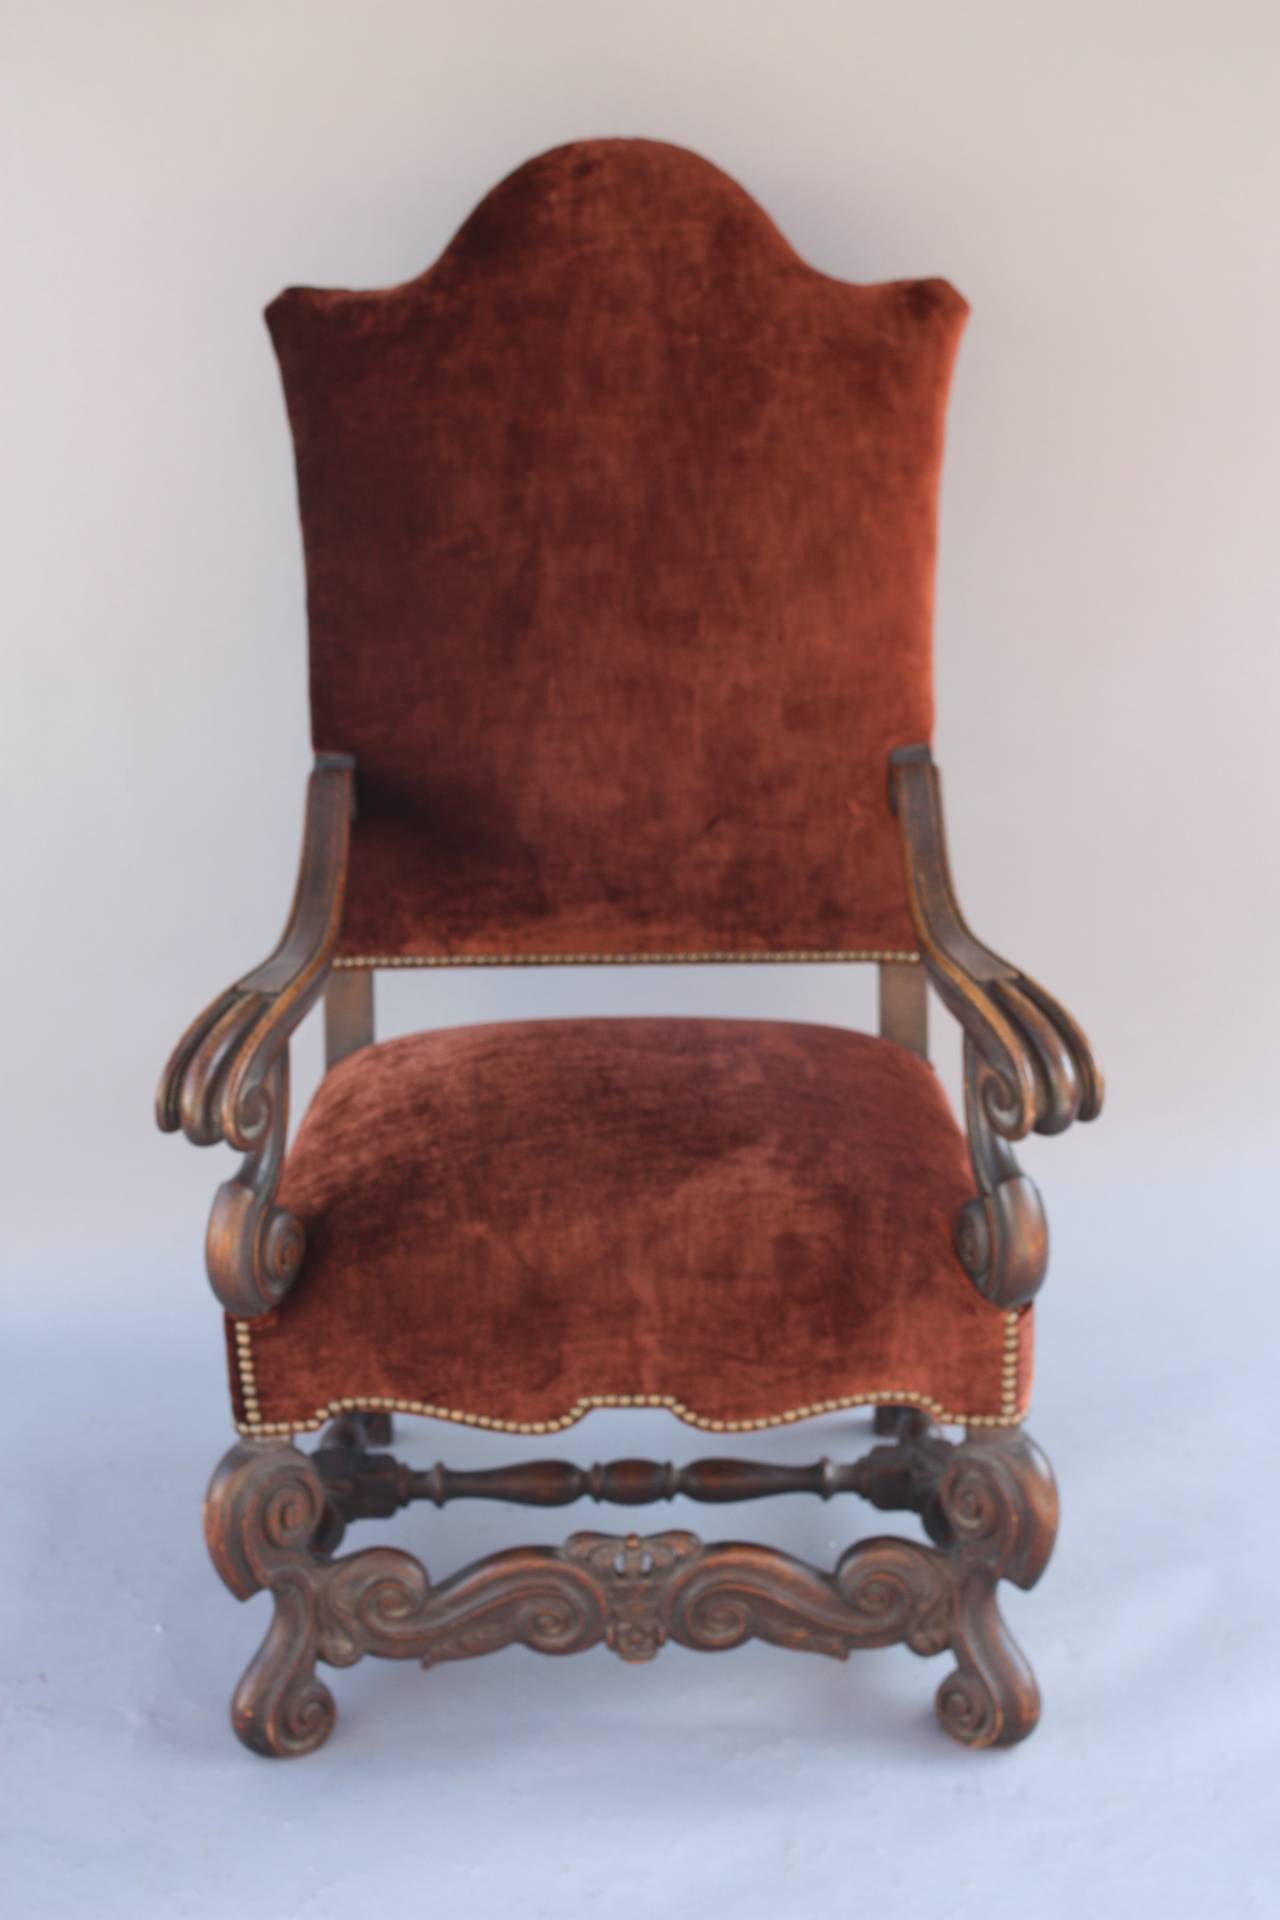 Circa 1920's armchair with carved walnut frame and new velvet upholstery 28.5: W x 26